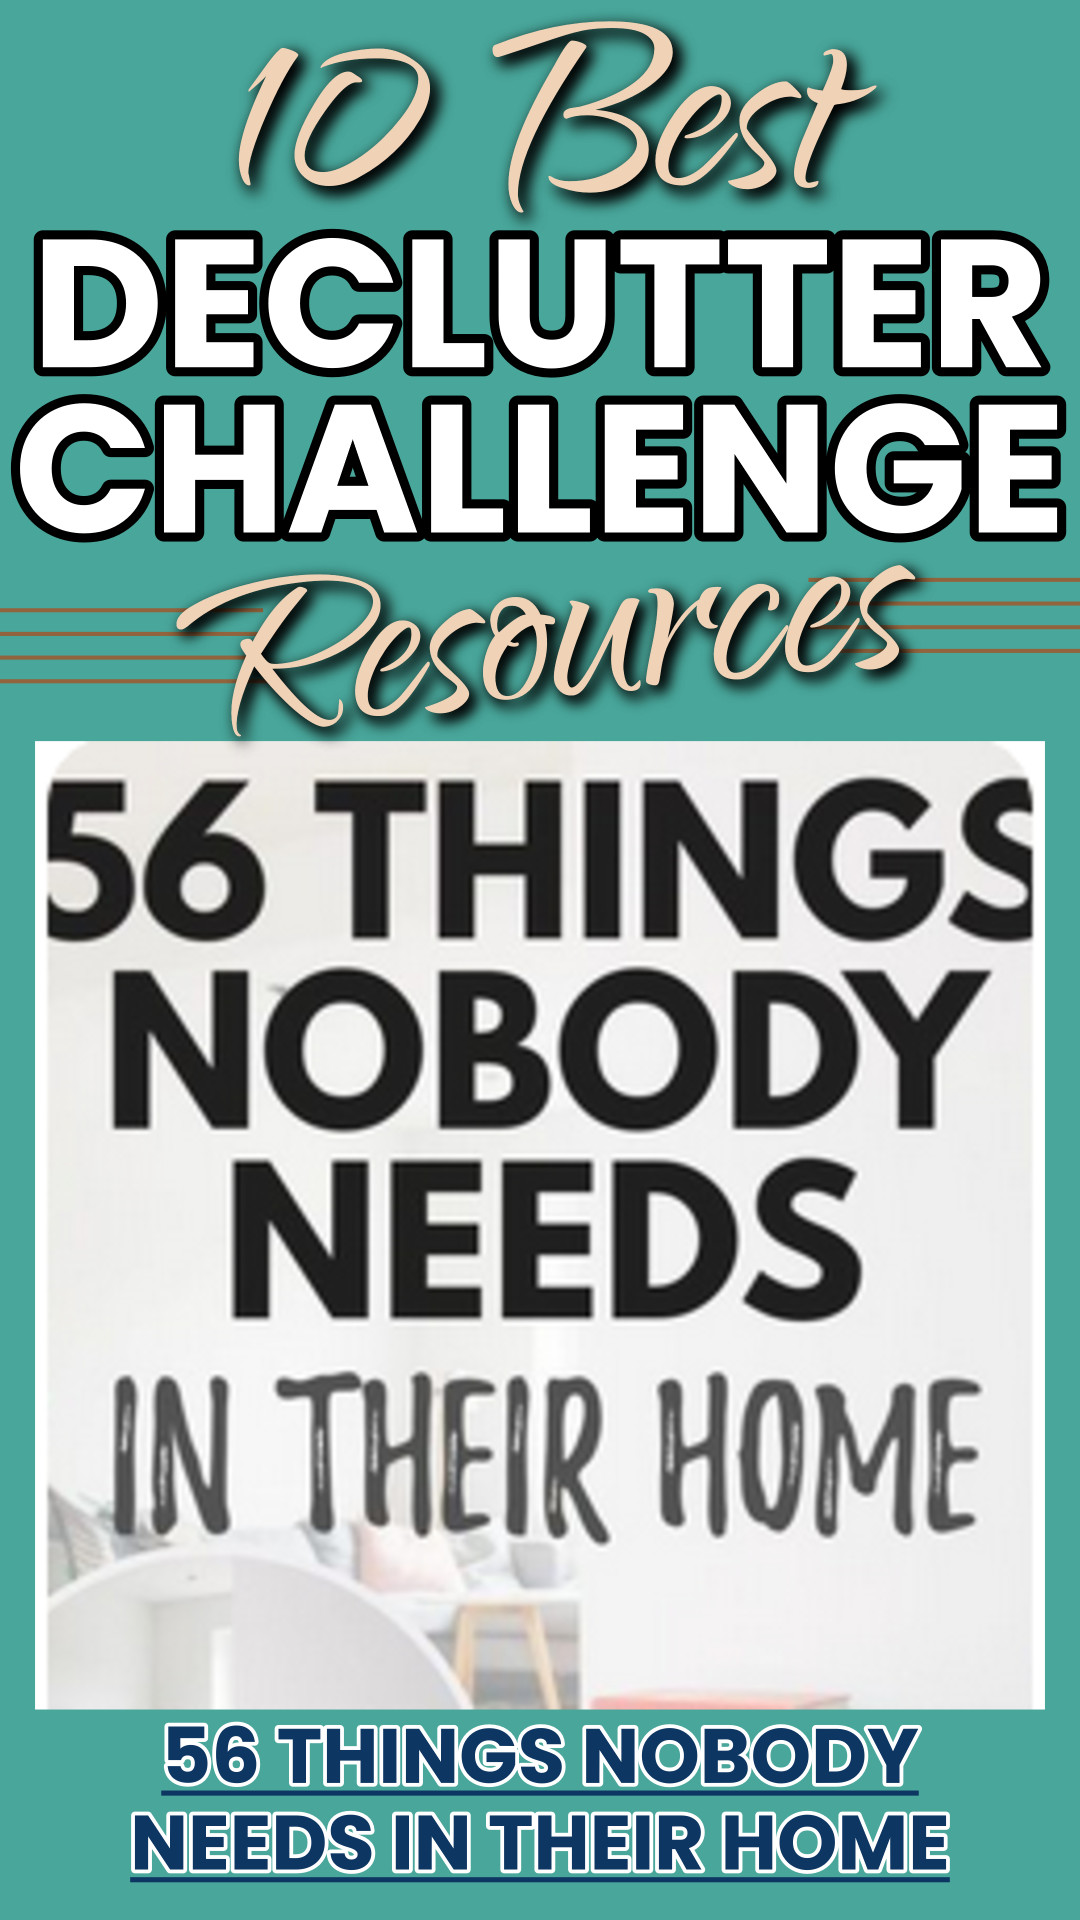 56 Things Nobody Needs In Their Home